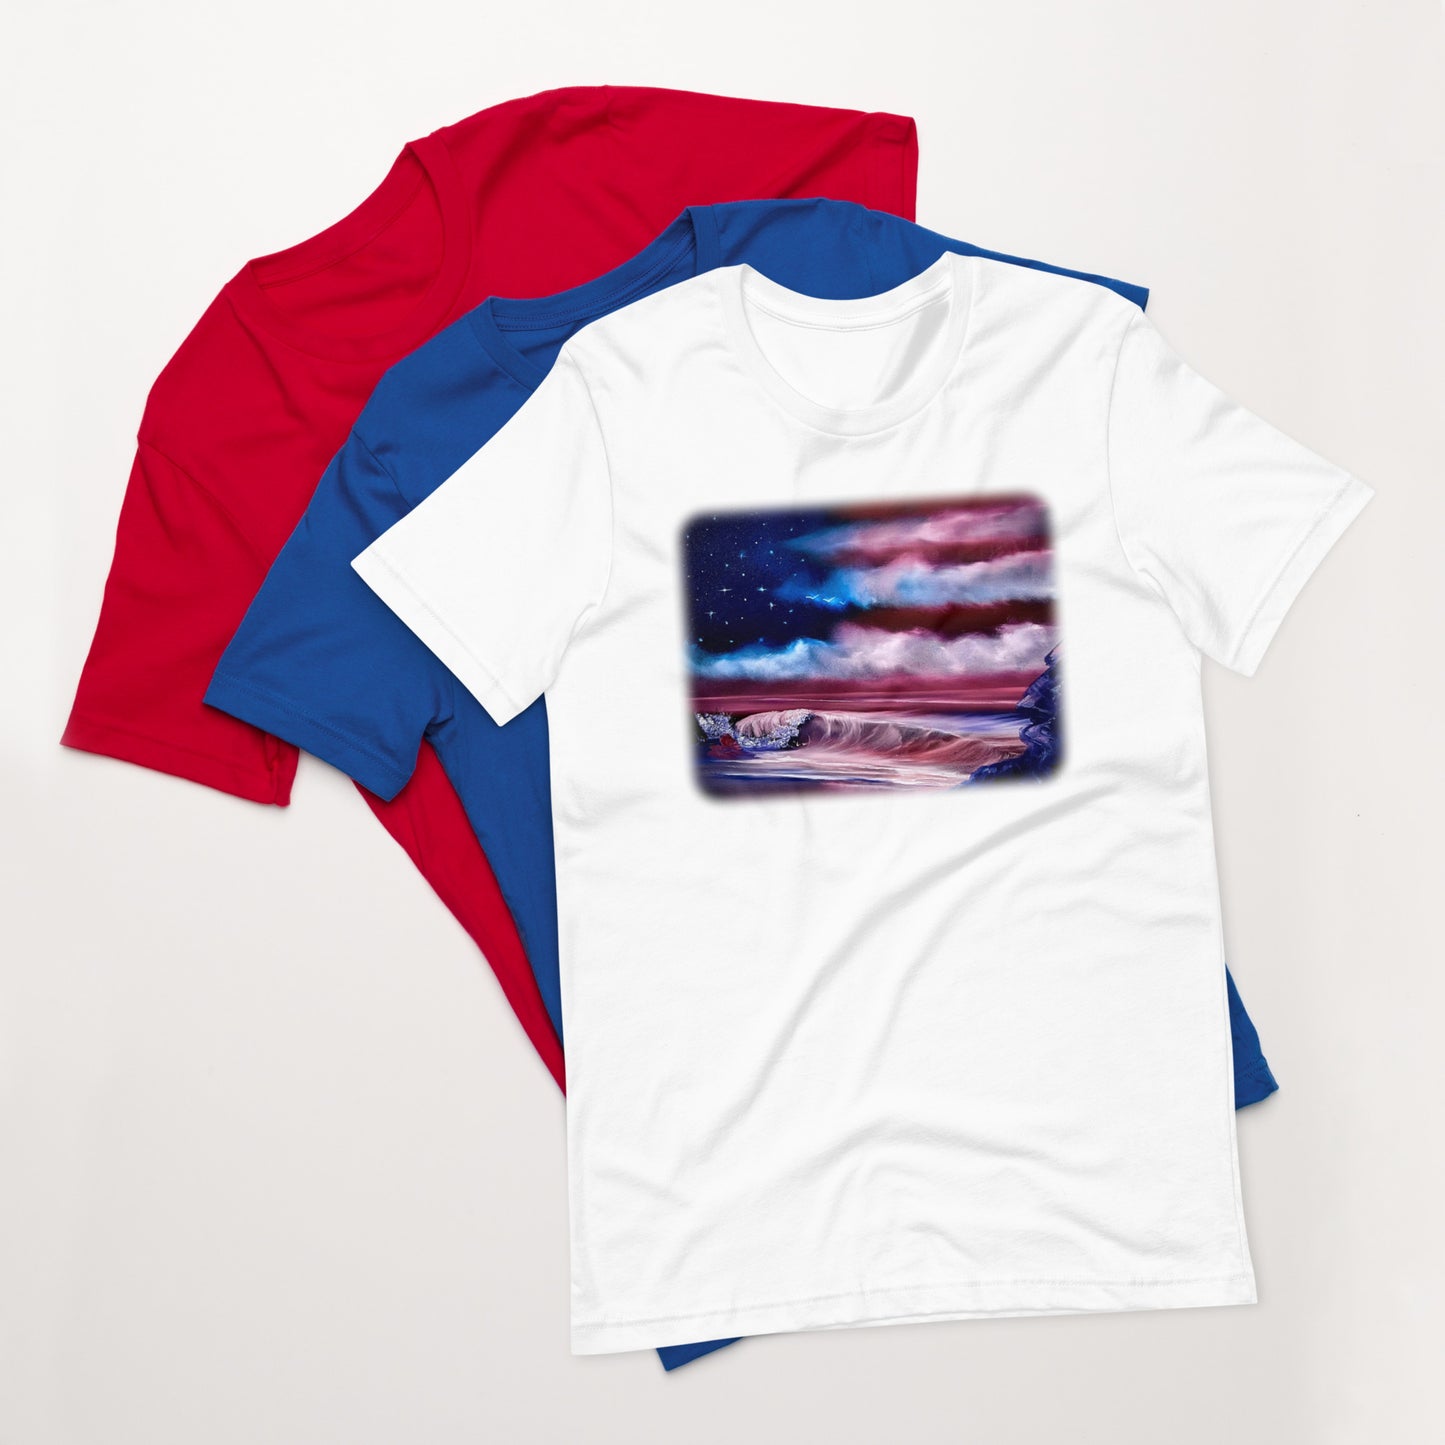 Clothing - American Flag Patriotic Unisex t-shirt by PaintWithJosh